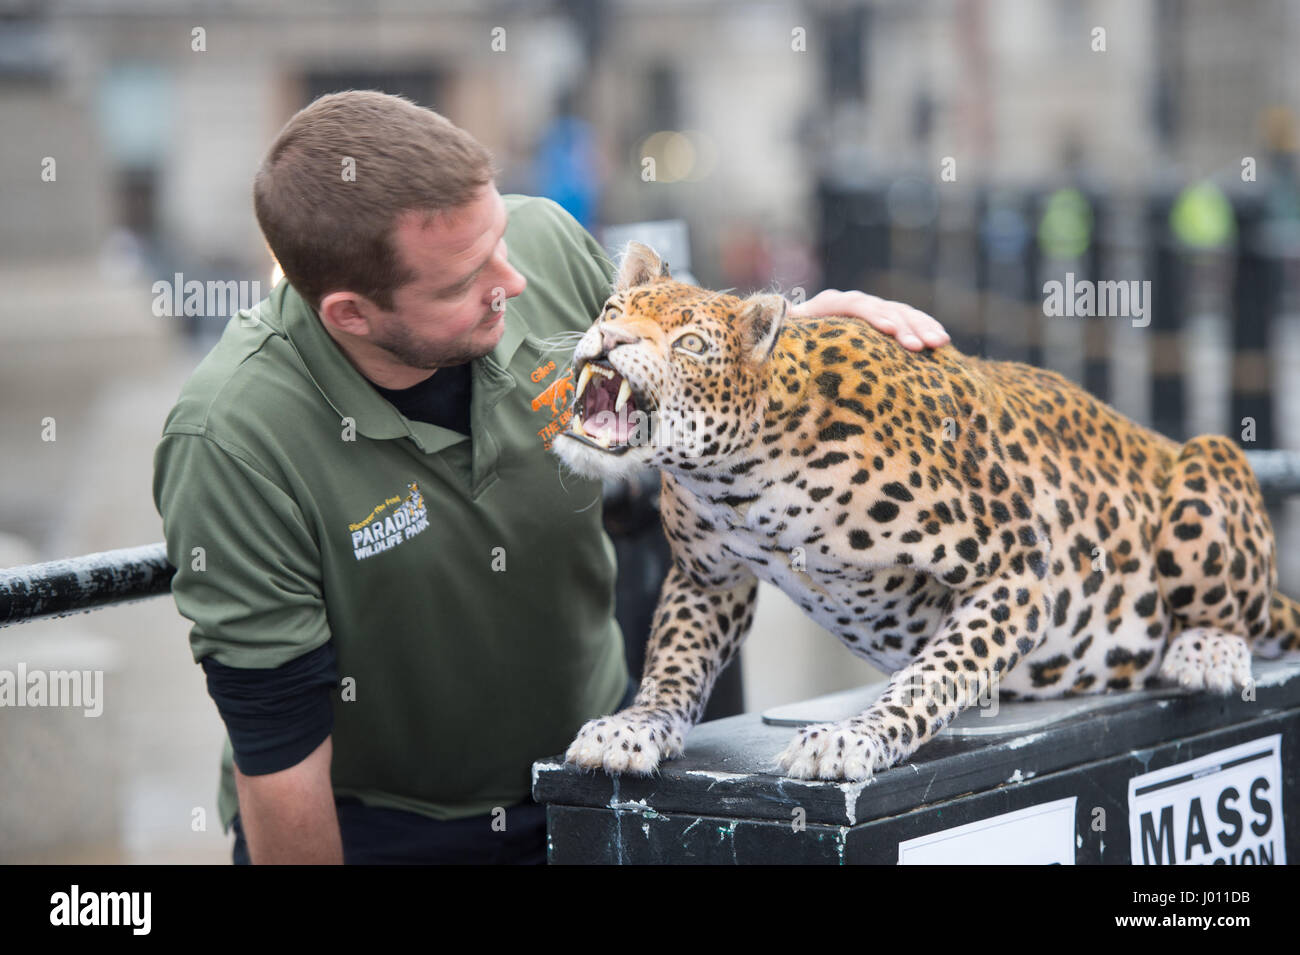 Nat Geo WILD unveils the world's first hyper realistic animatronic leopard  to mark the launch of Big Cat Week (6-12 March), in association with  charity the Big Cats Initiative. Featuring: Atmosphere, Leopard,